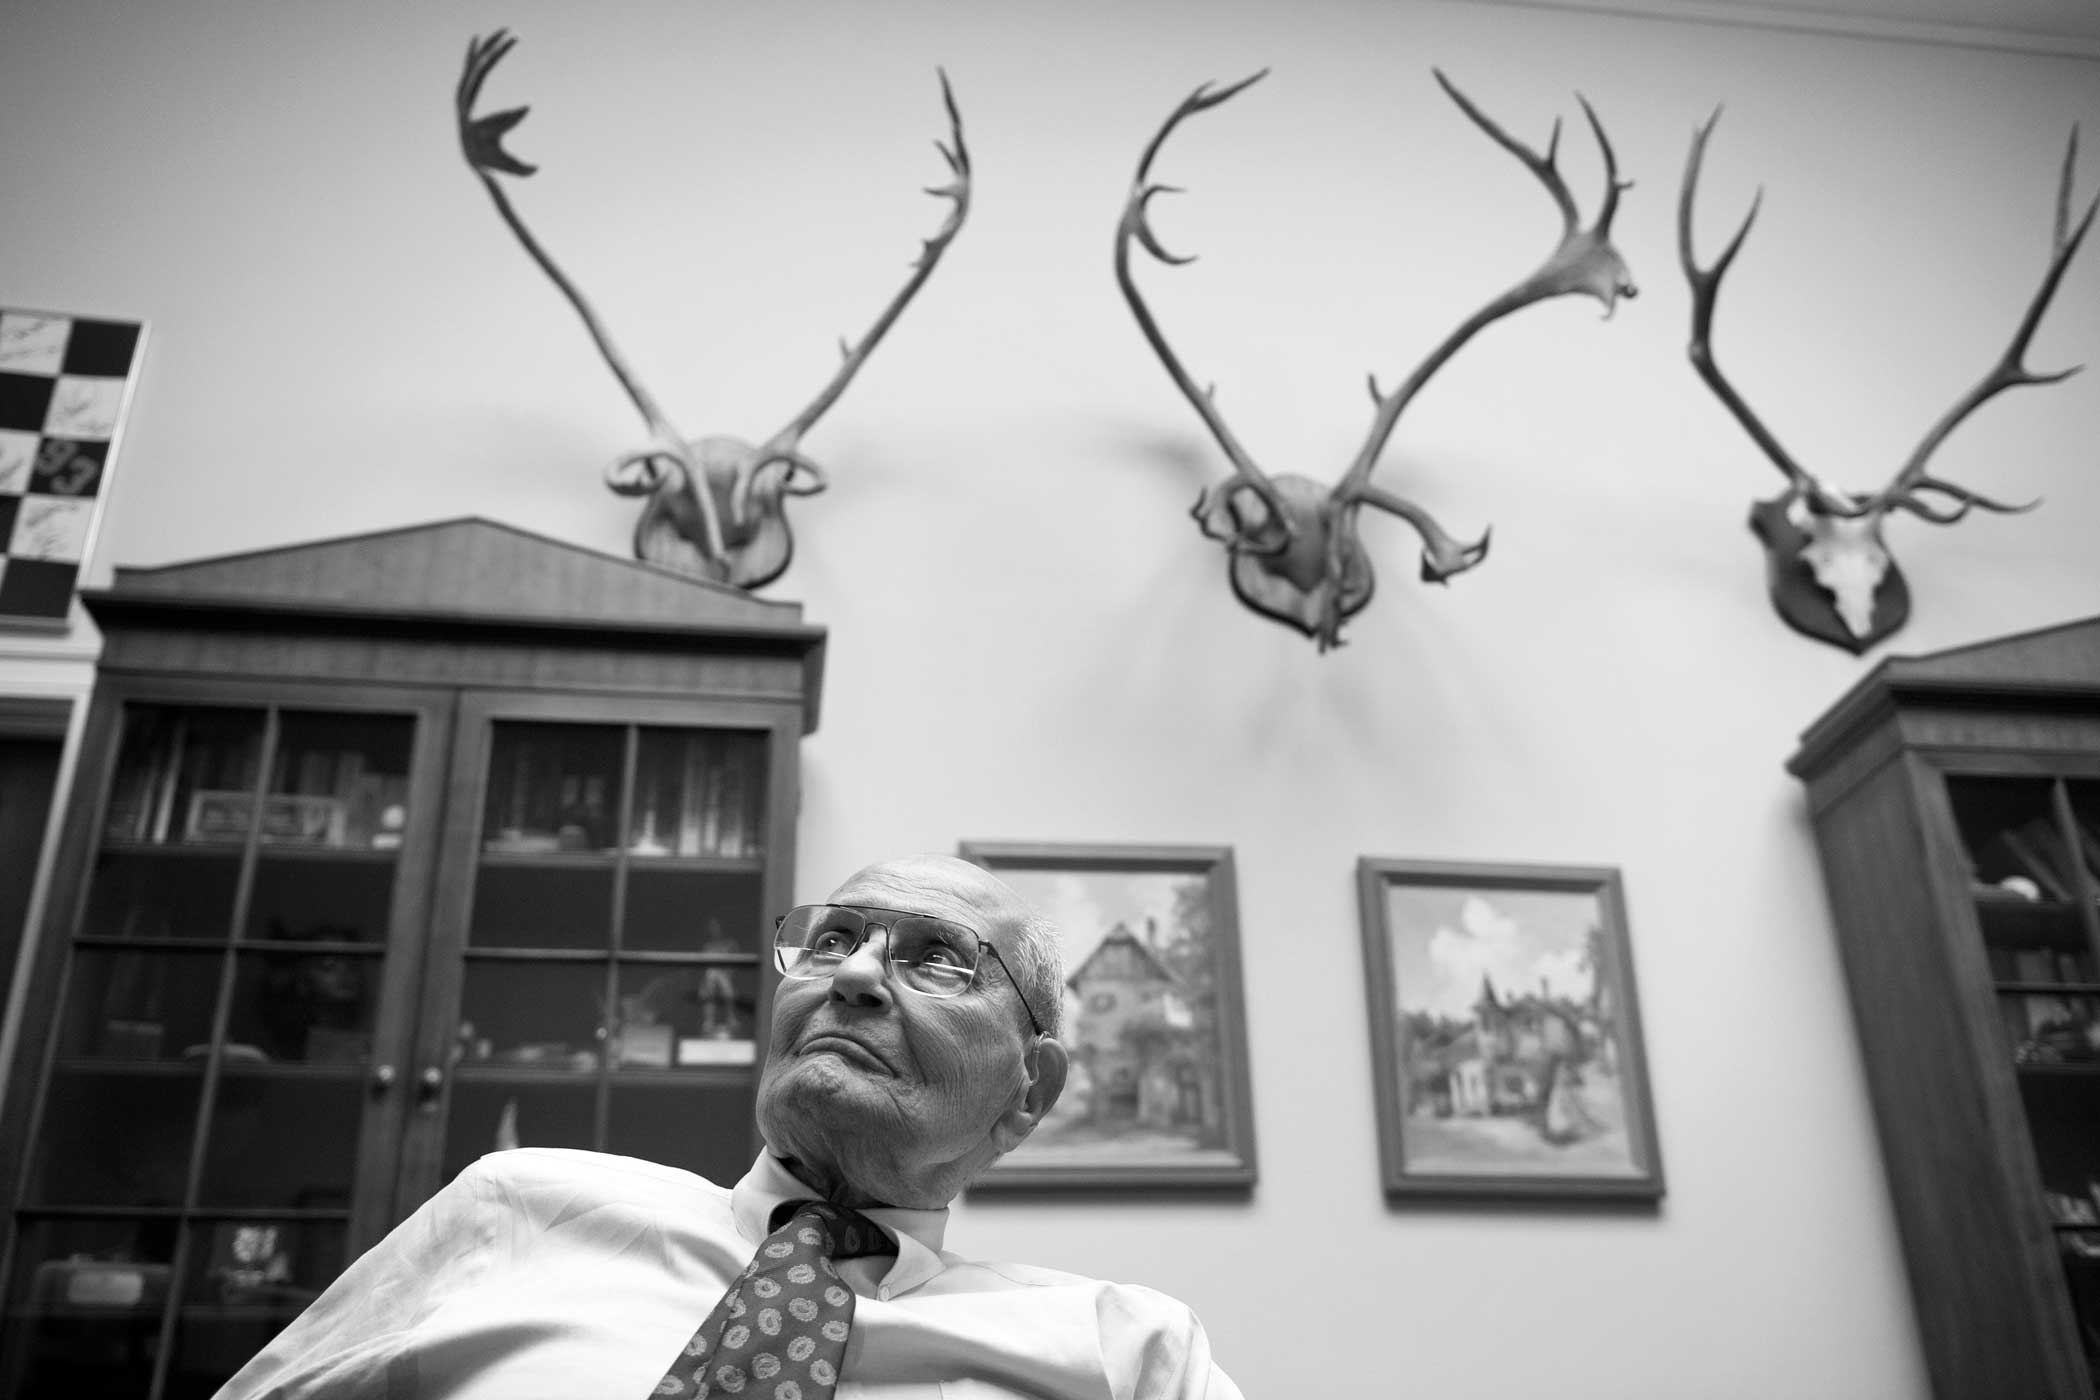 Rep. John Dingell, D-Mich., in his Rayburn office. Dingell served for more than 59 years—the longest Congressional tenure in U.S. history.